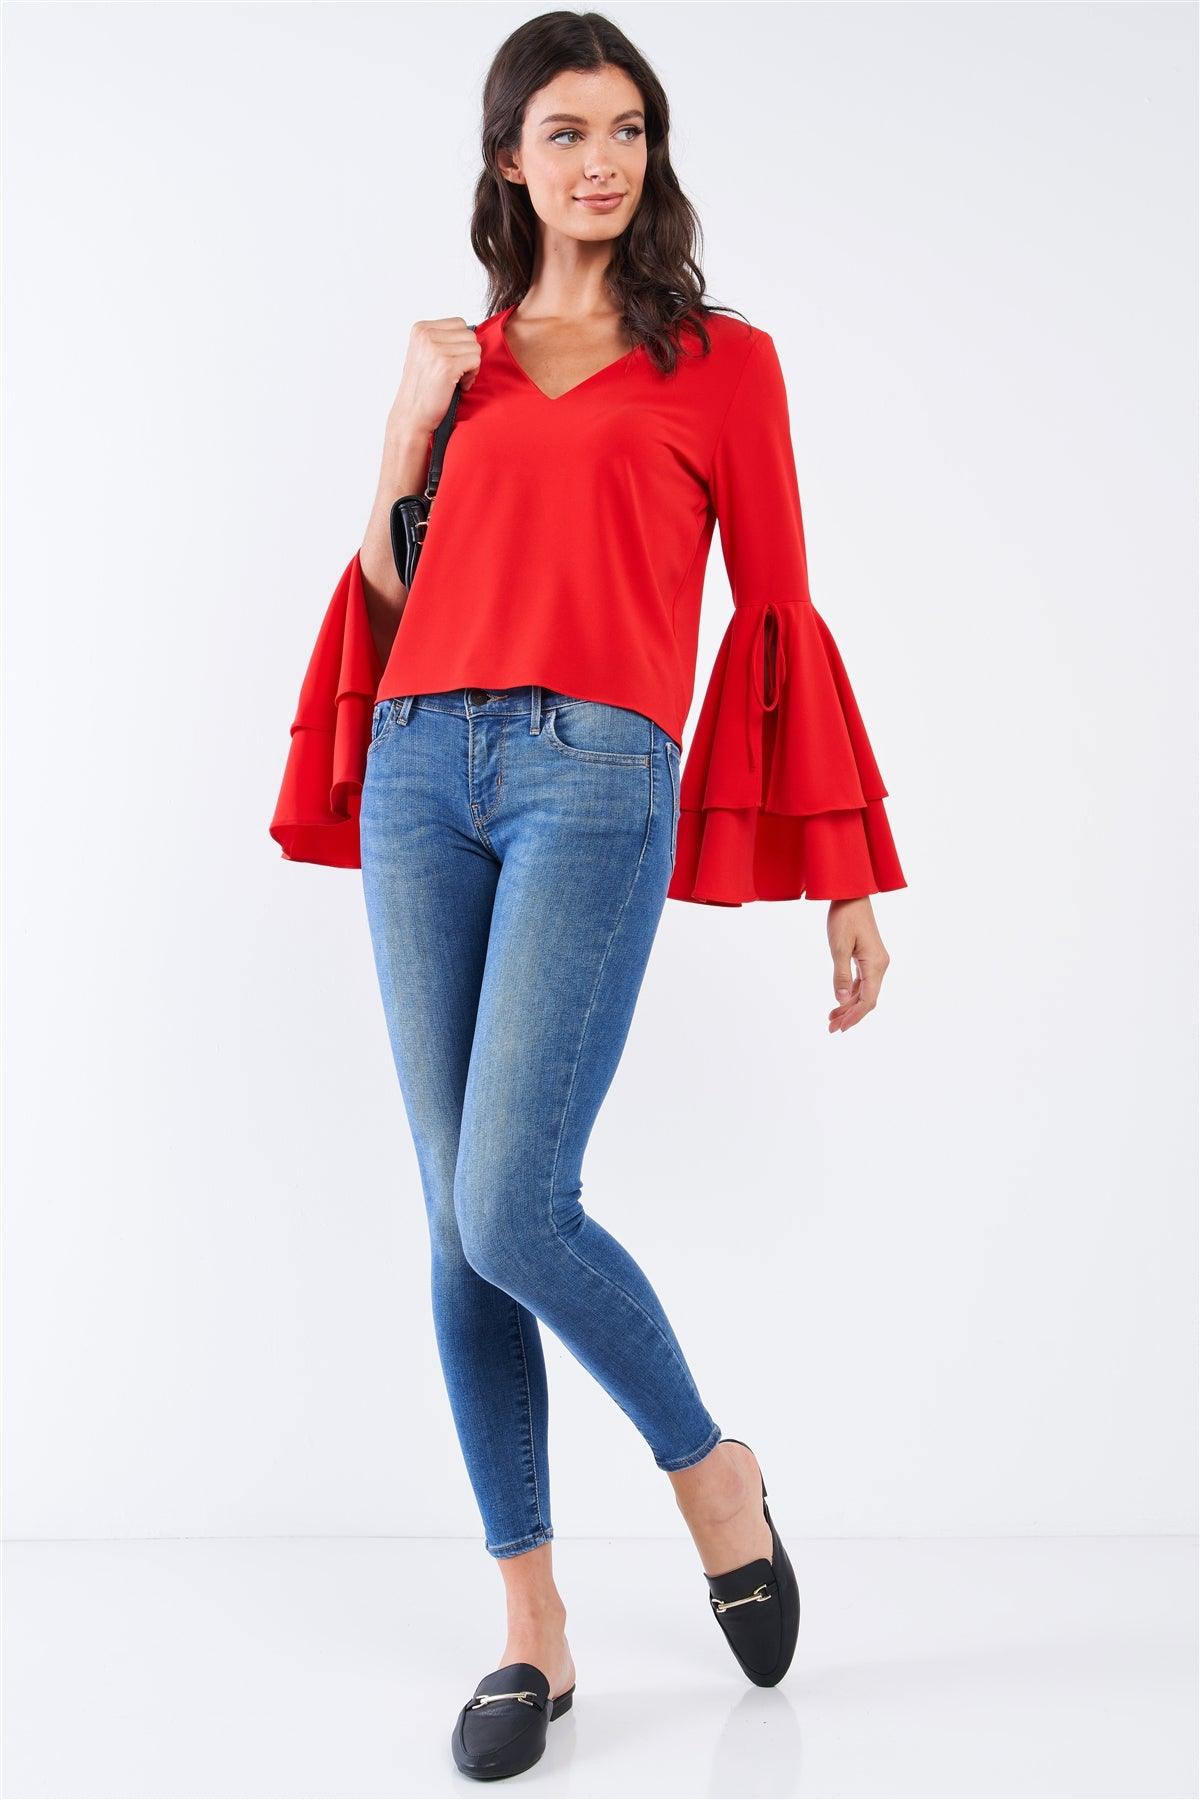 Crimson Red V-Neck Long Bluebell Slit Draw String Tie Double Frill Sleeve Top